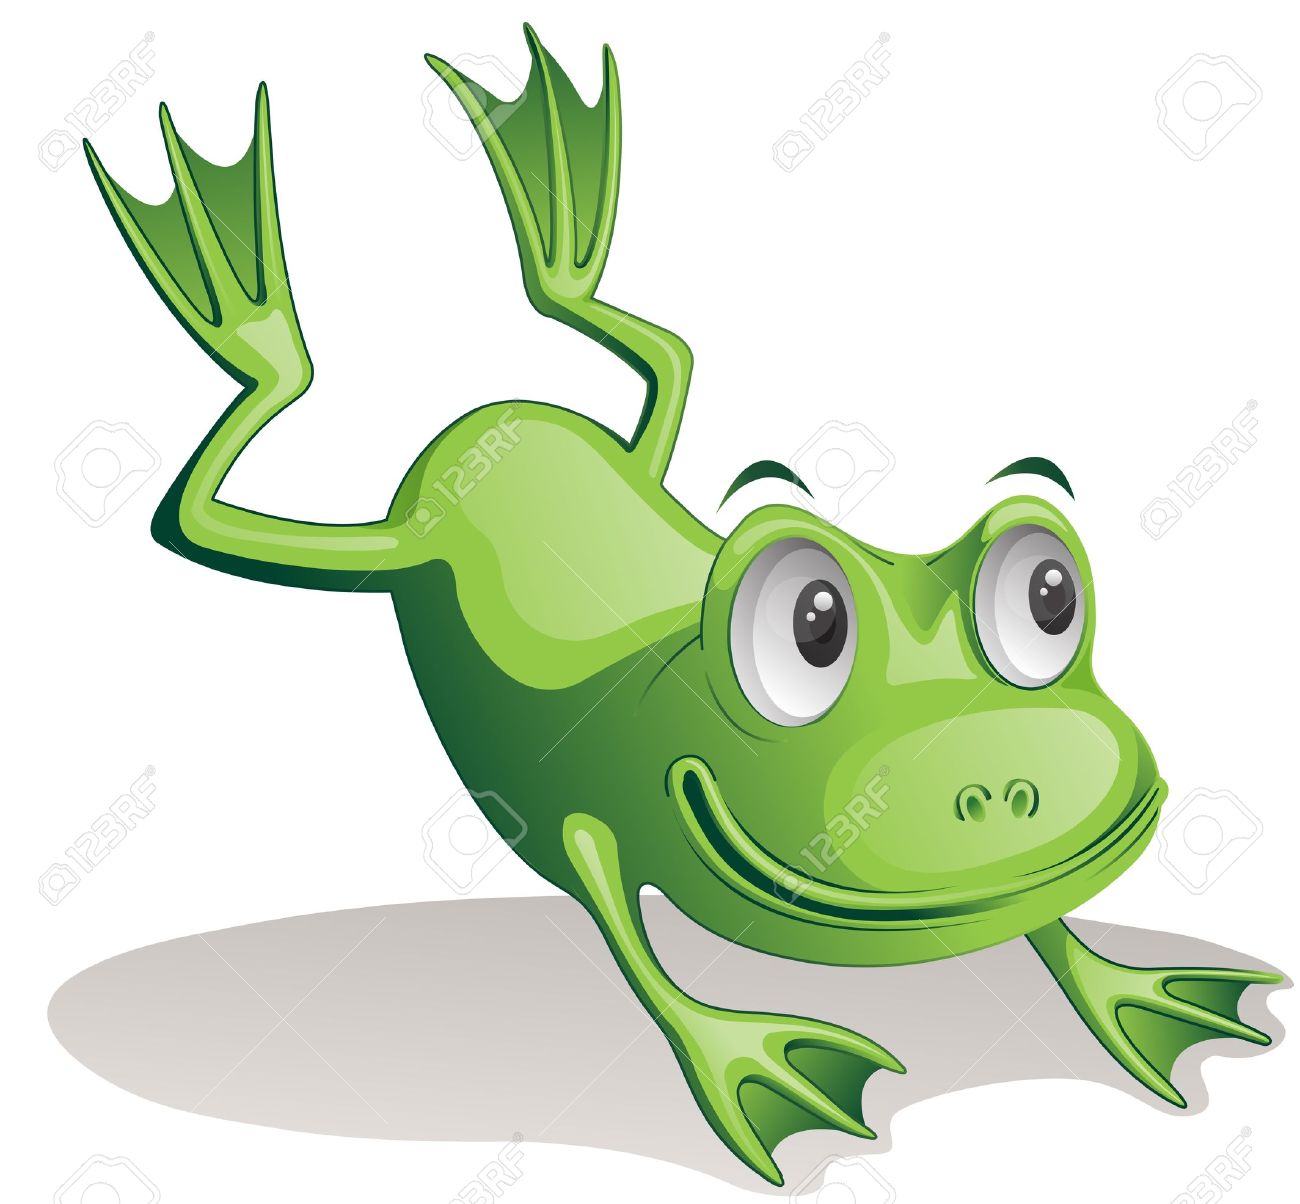 Introduction to The Jumping Frog from Sketches, New and Old